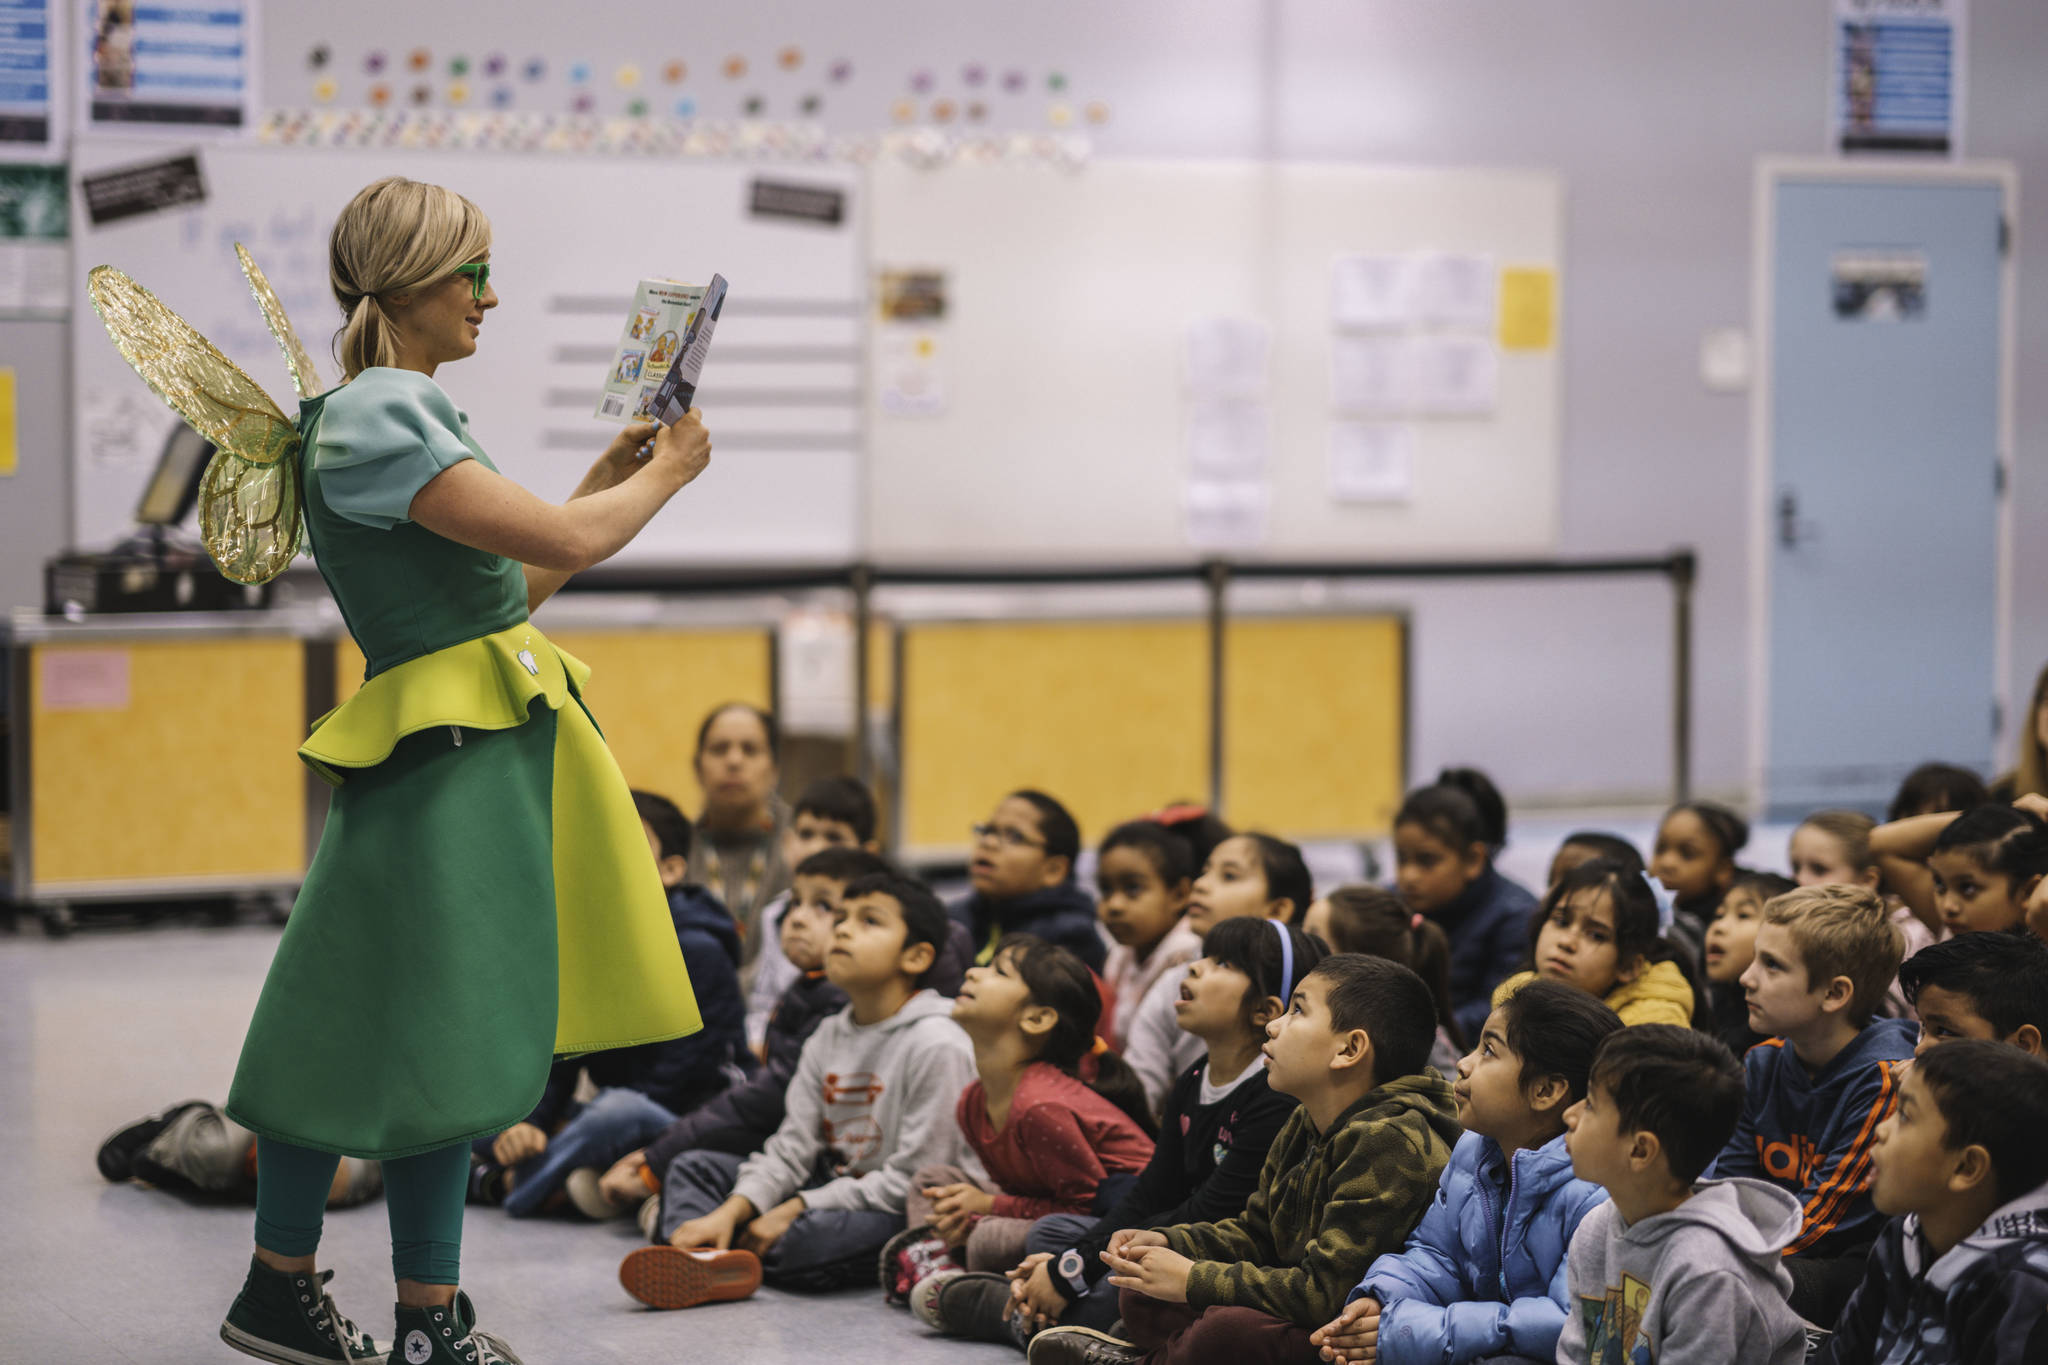 The Tooth Fairy visits Kent students for a story time reading and fun dental facts. Students received a new toothbrush and a better understanding of the importance of a healthy smile. COURTESY PHOTO, Daniel Macadangdang